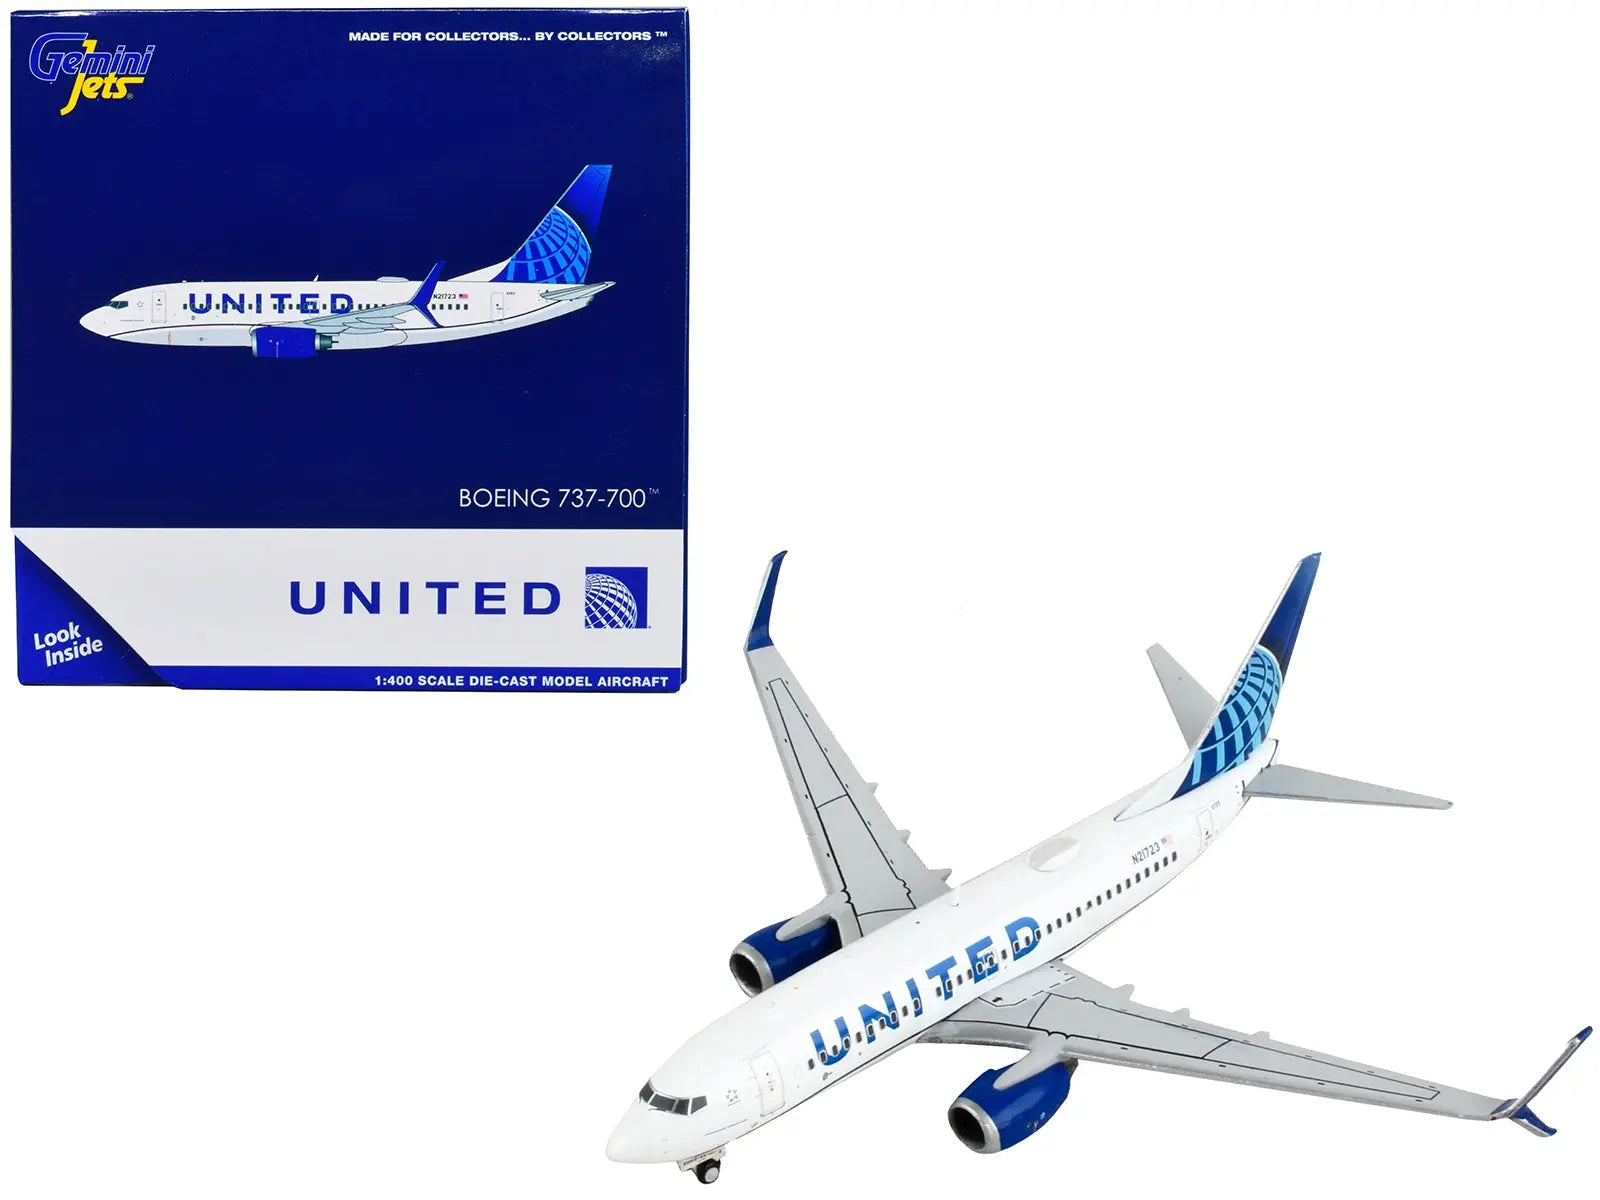 Boeing 737-700 Commercial Aircraft "United Airlines" White with Blue 1/400 Diecast Model Airplane by GeminiJets GeminiJets